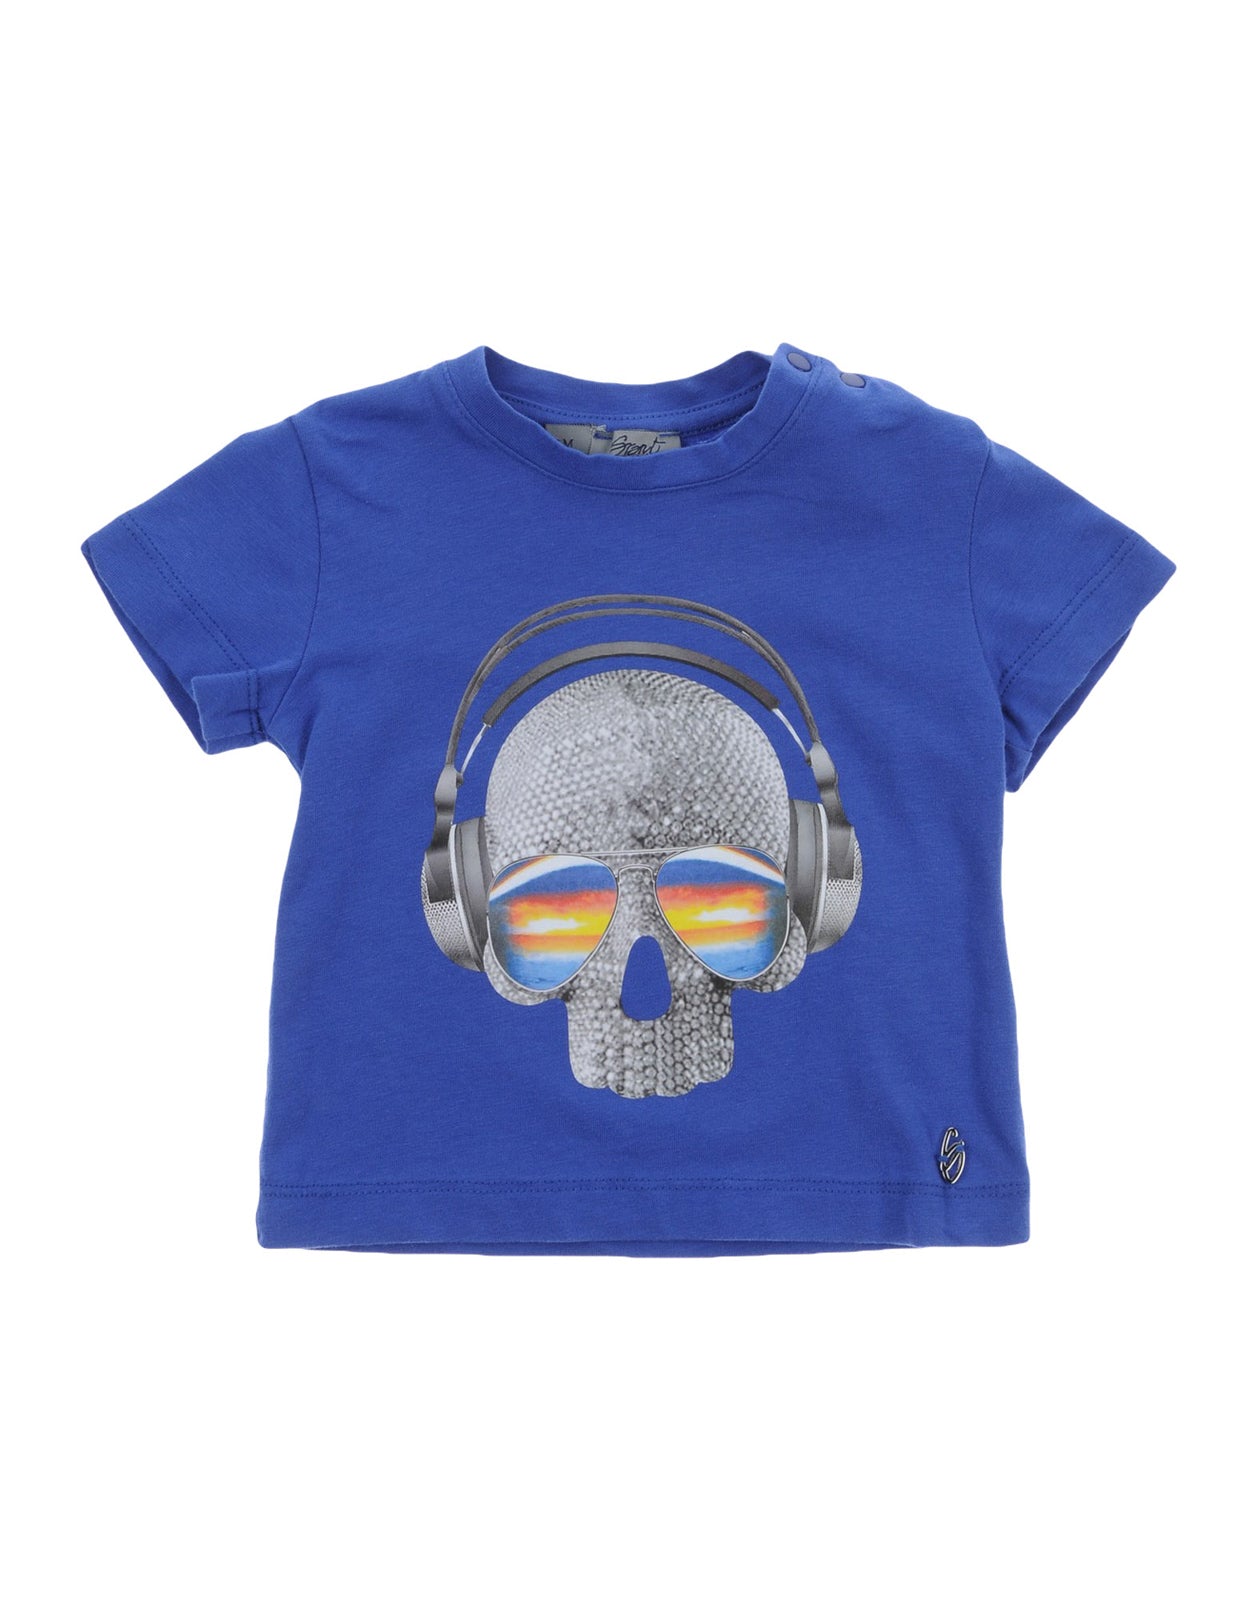 GRANT GARCON BABY T-Shirt Top Size 6M Coated Skull gallery main photo